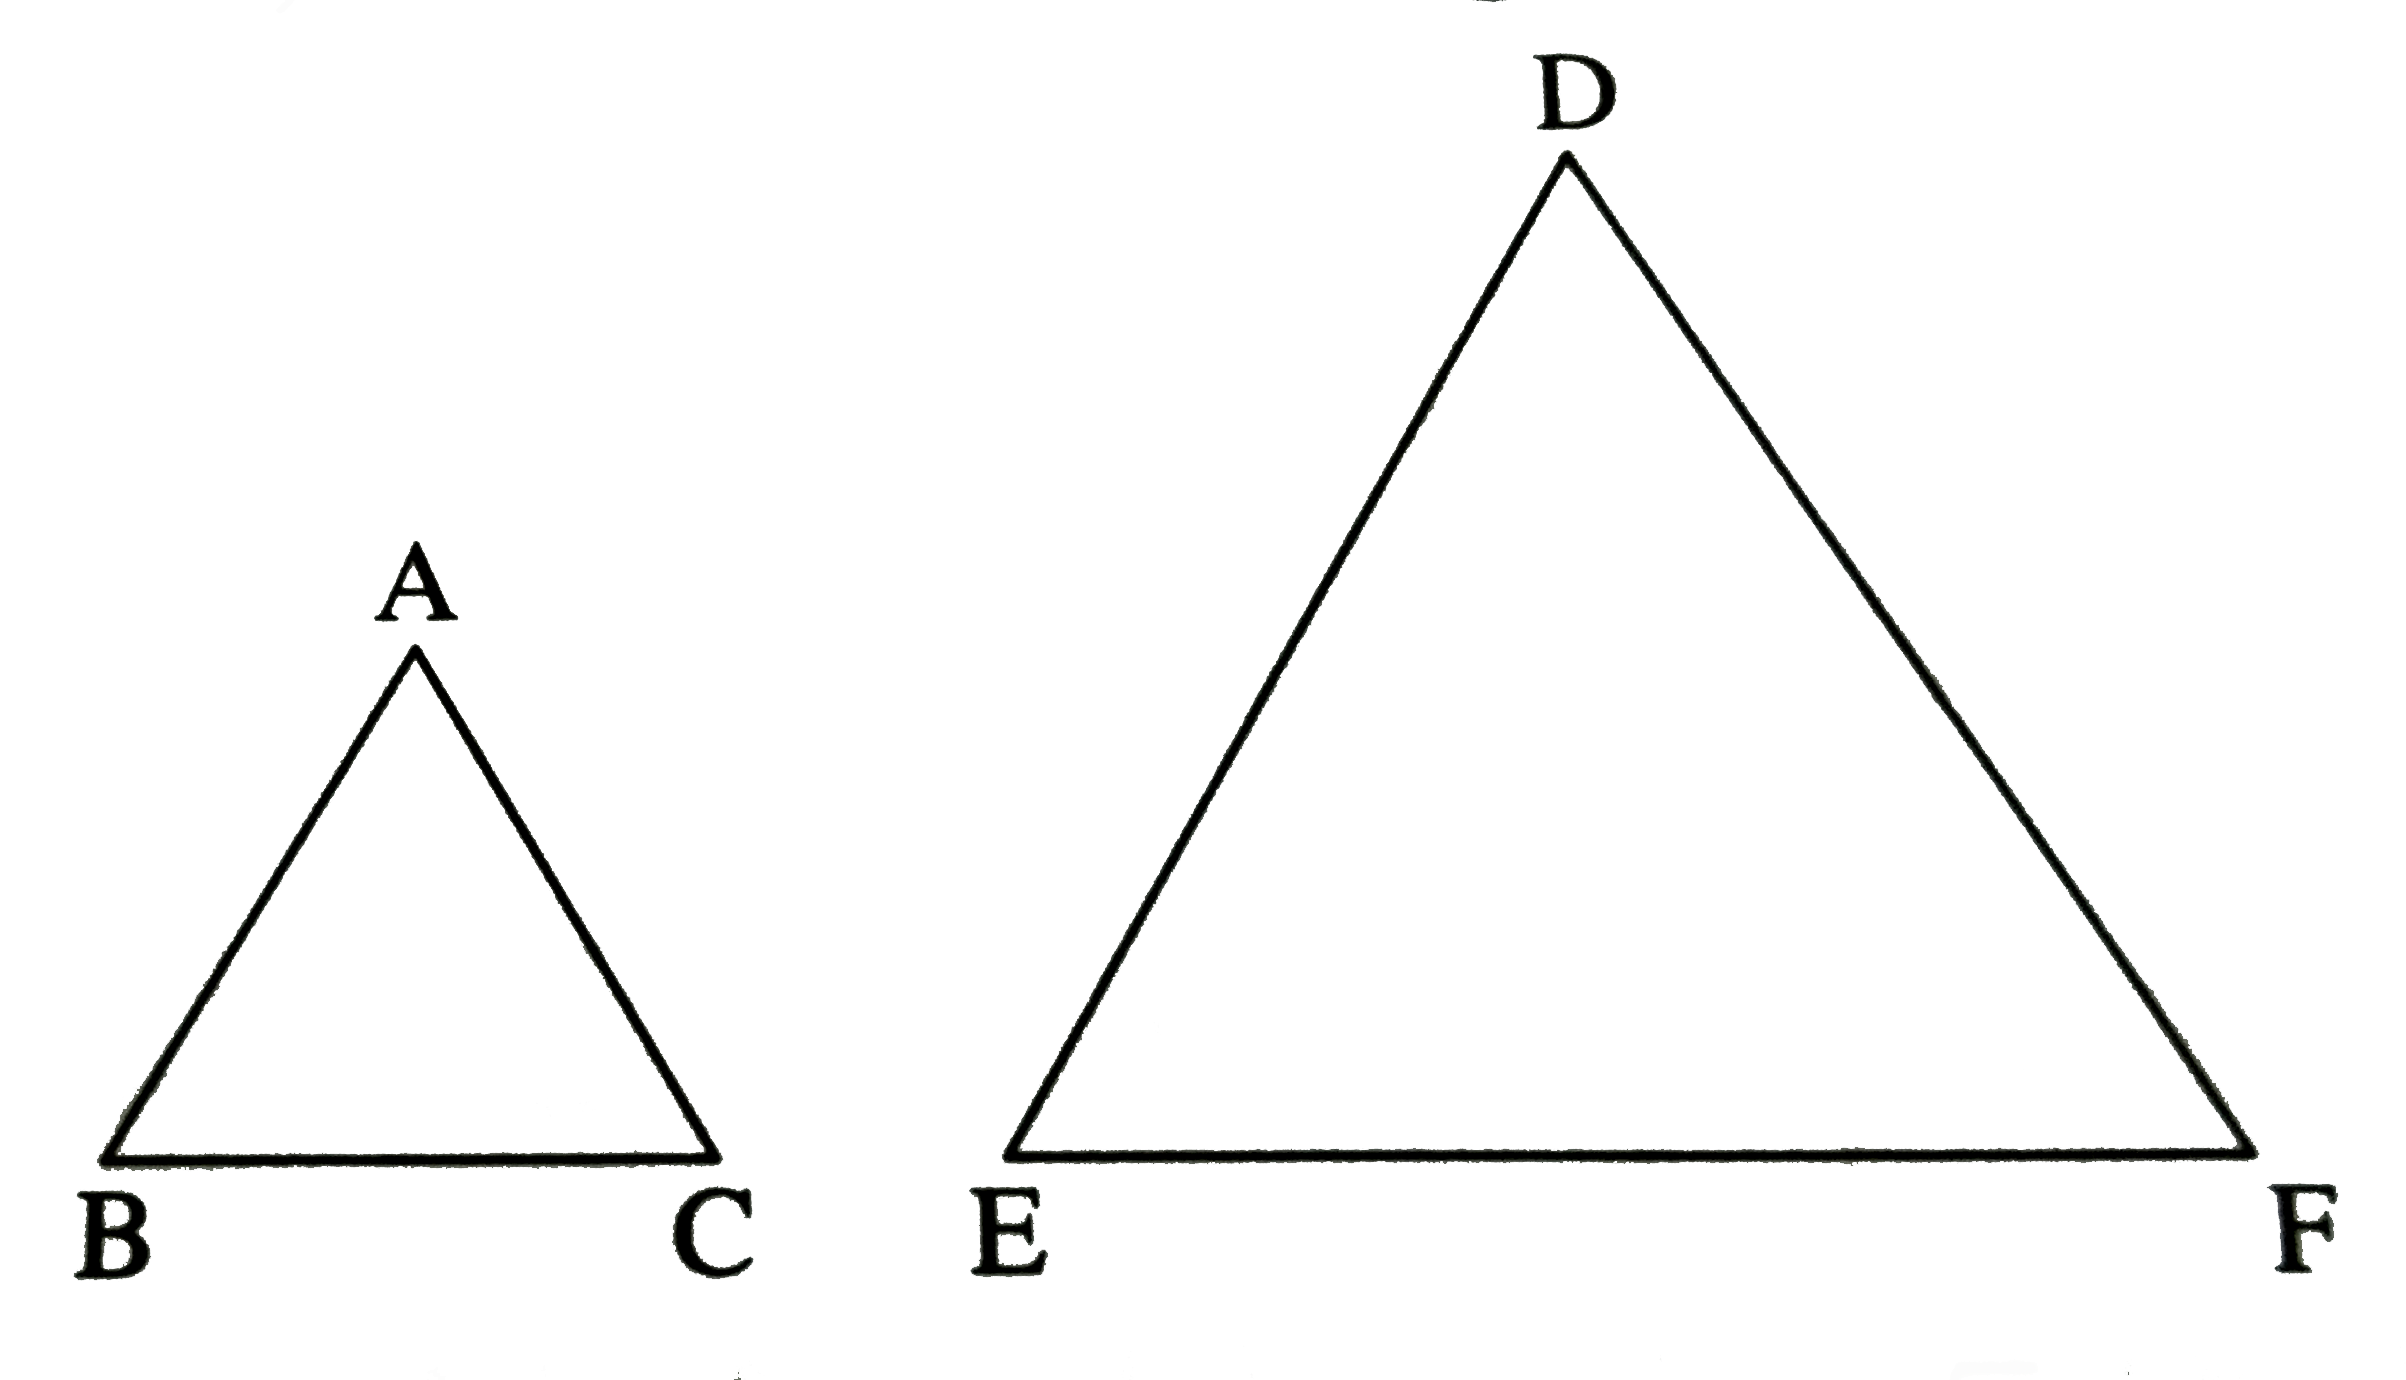 DeltaABC and DeltaDEF are equilateral triangles, A(DeltaABC):A(DeltaDEF)=1:2   If AB=4 then what is length of DE?